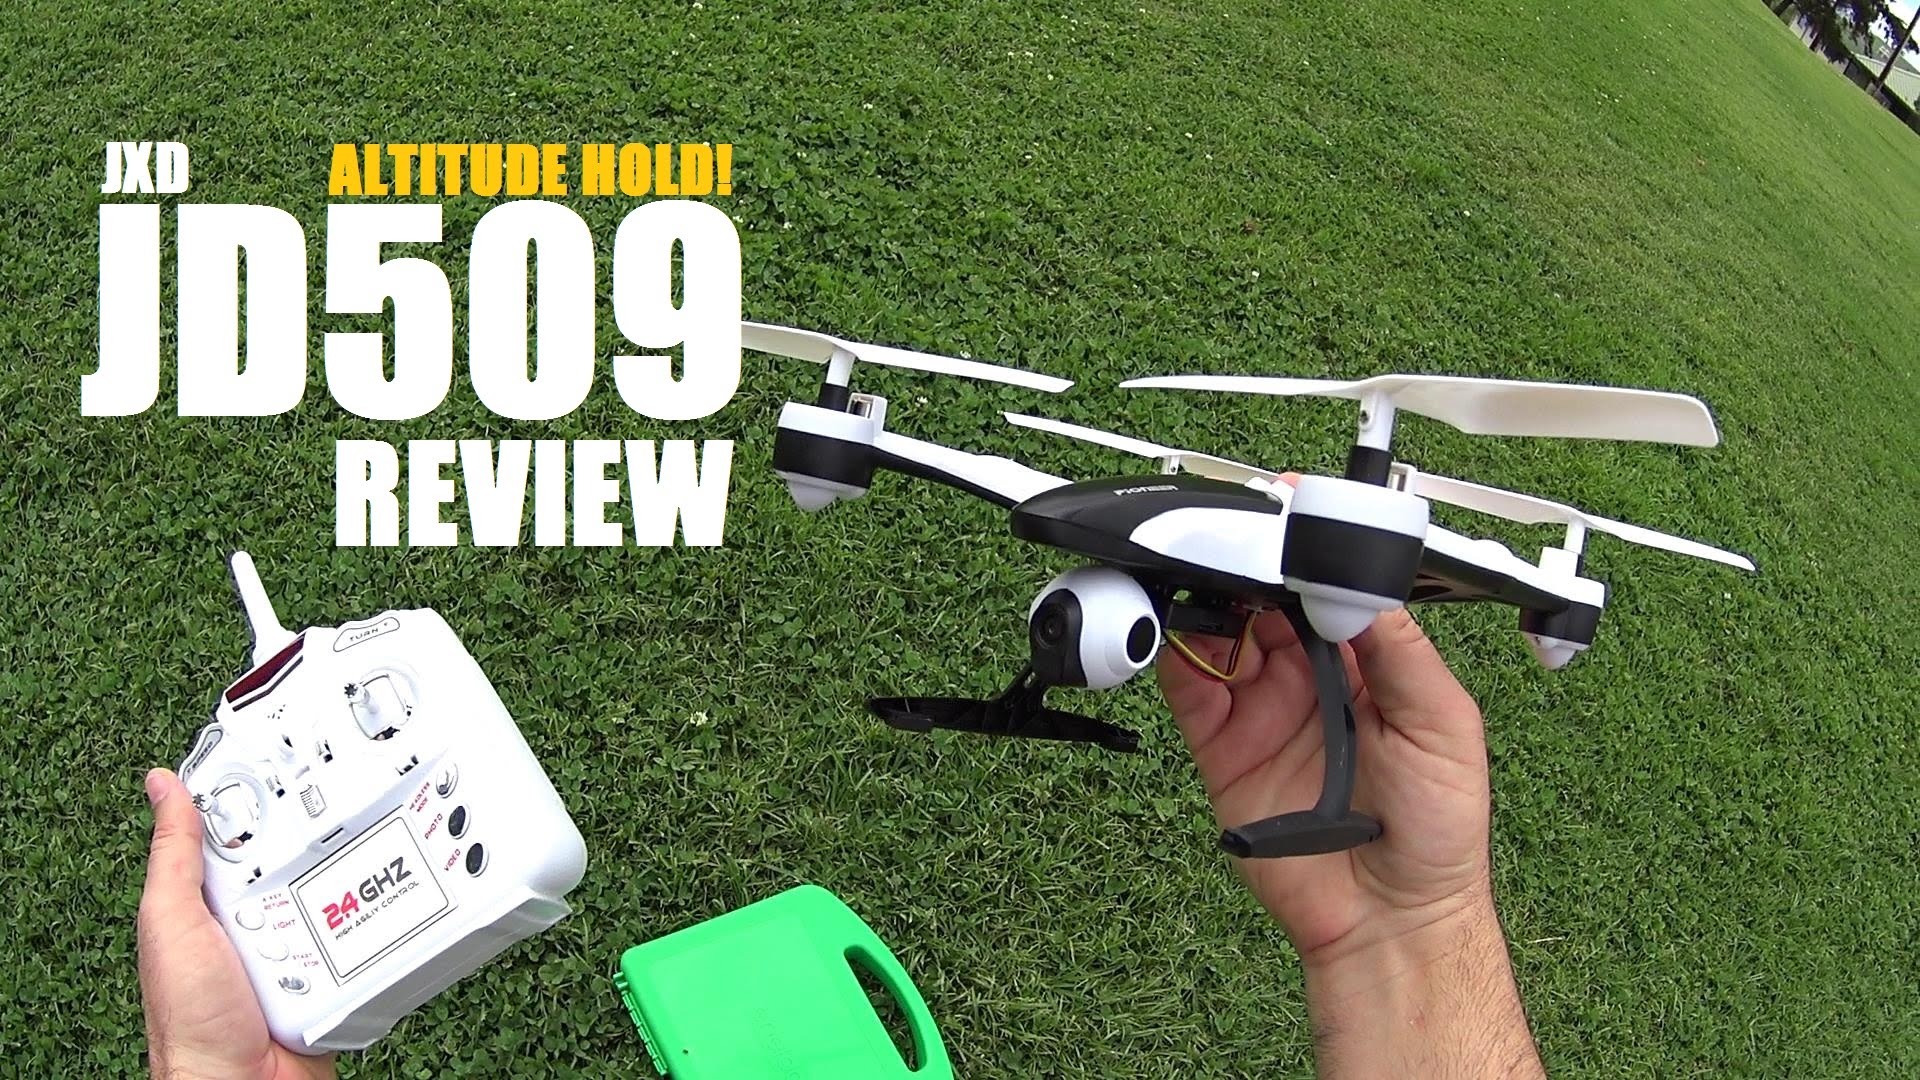 JXD JD509V Altitude Hold HD Quadcopter Review – [Flight Test, Pros & Cons]